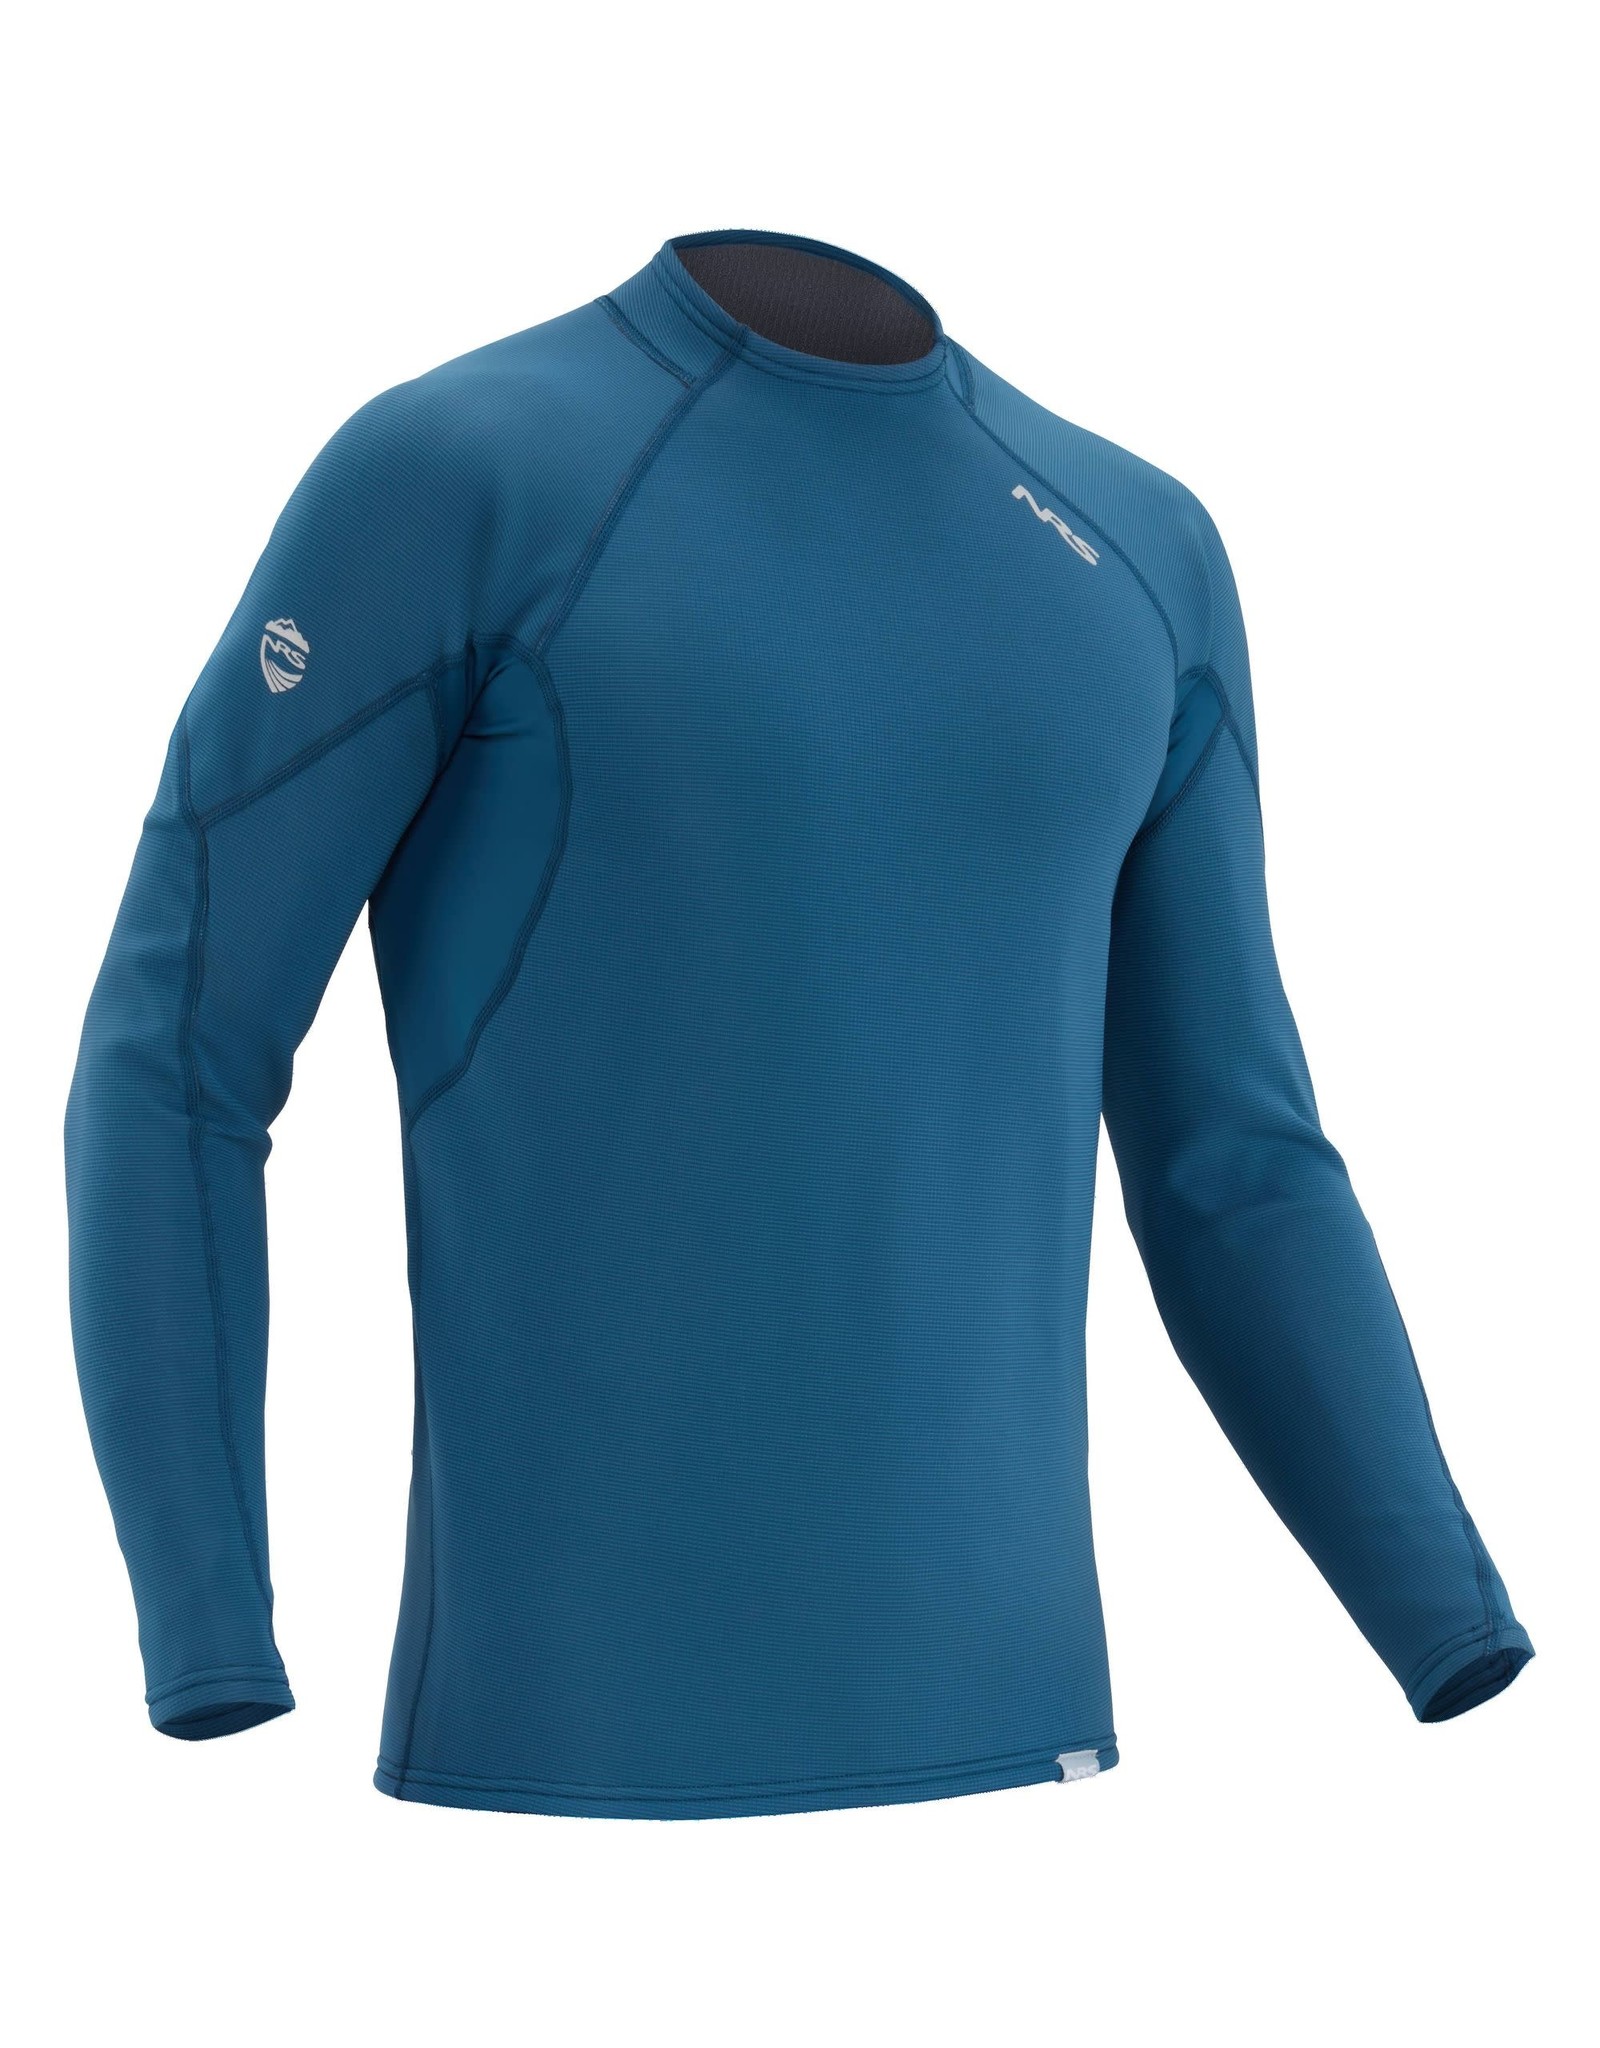 NRS NRS Chandail Hydroskin 0.5 homme Manche Longue